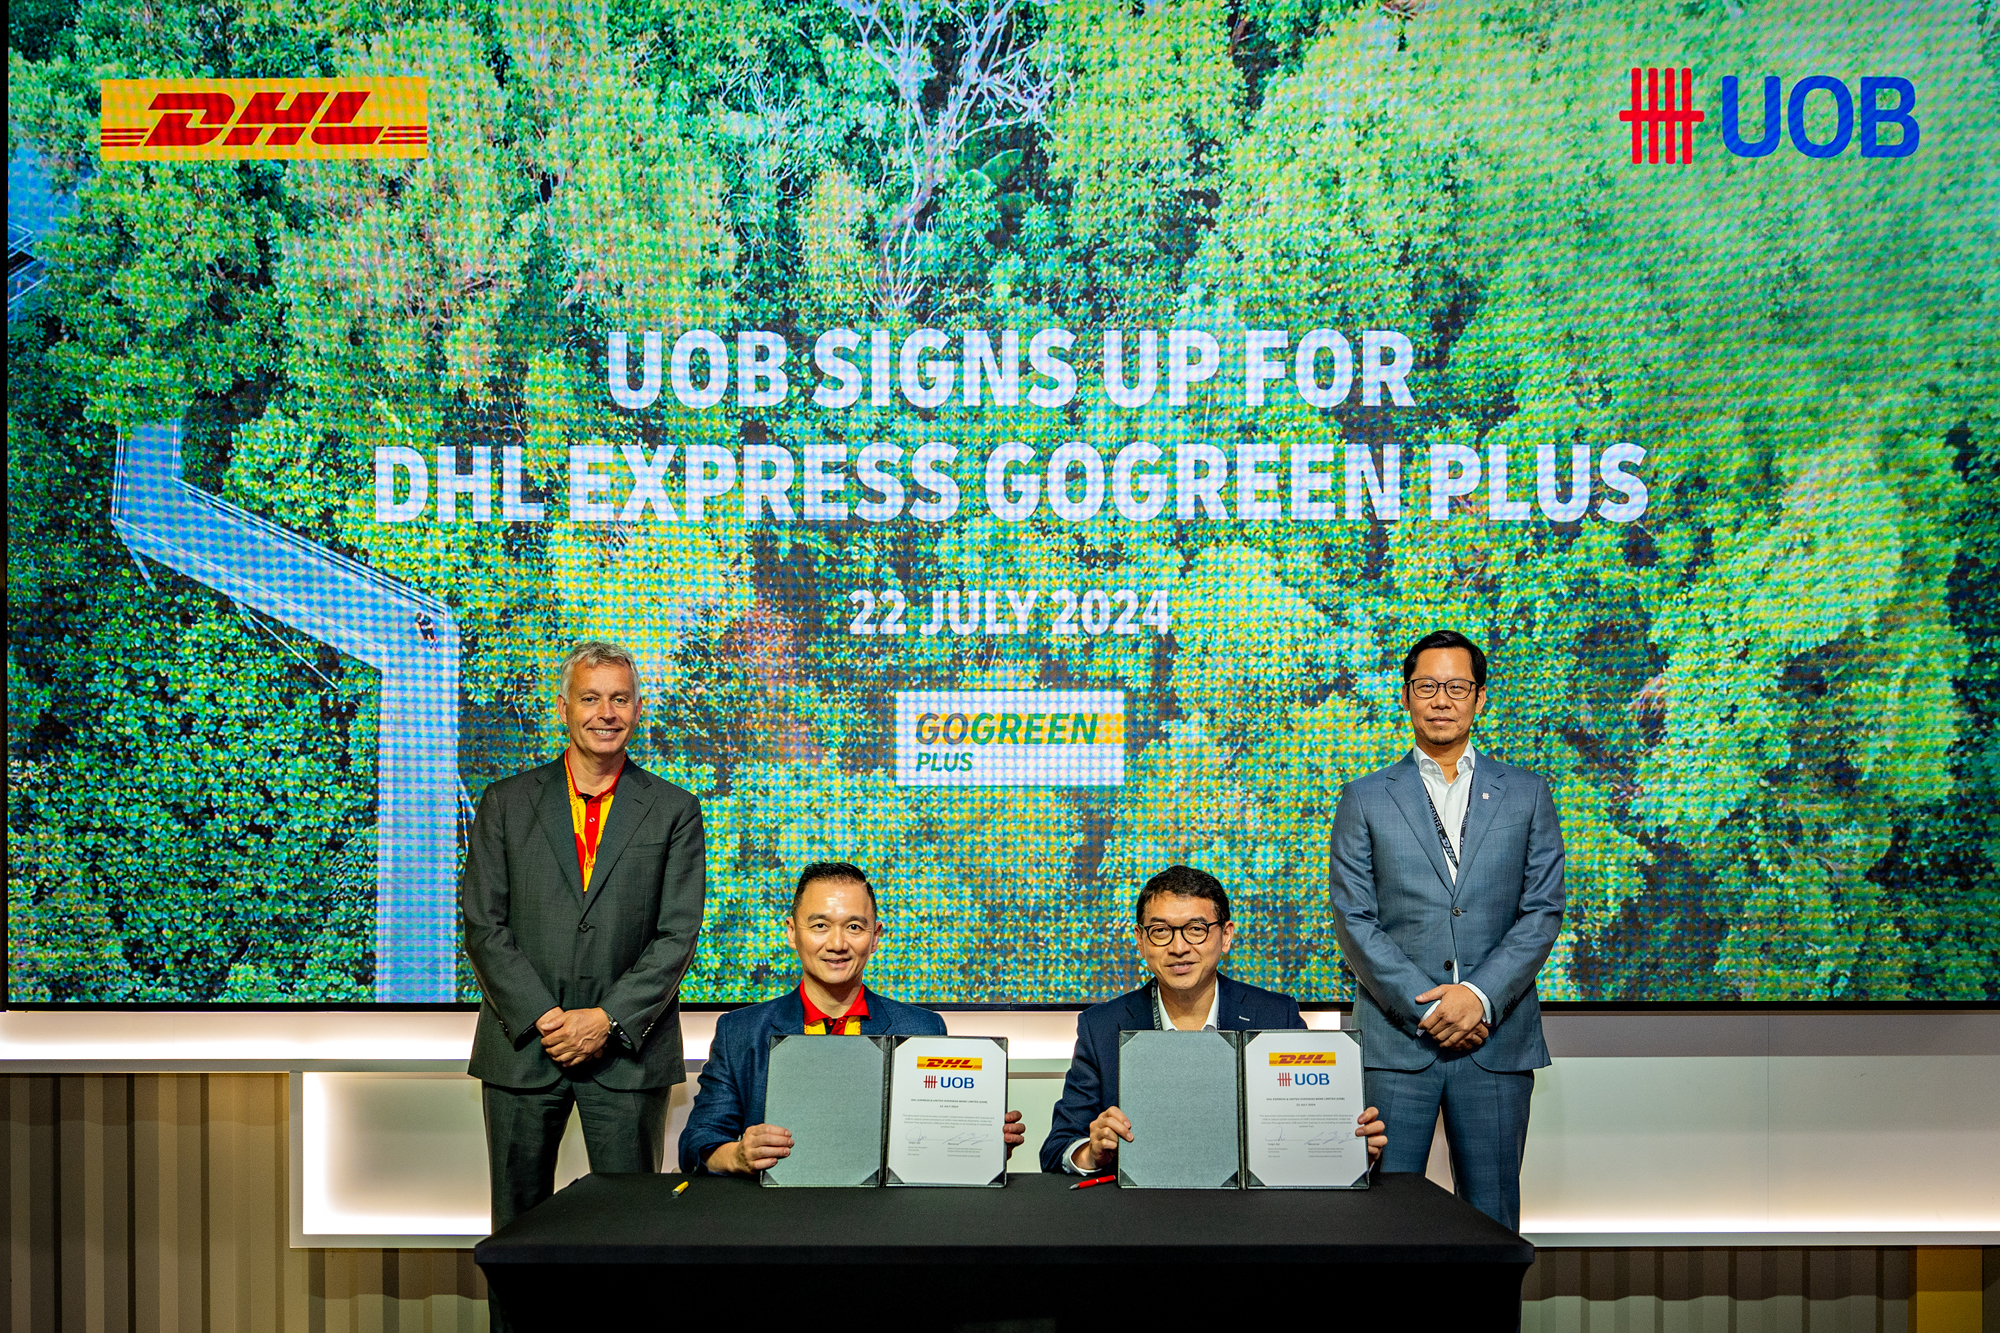 UOB has entered into a strategic agreement with DHL Express for its GoGreen Plus service to co-invest in the use of sustainable aviation fuel for the Bank's international parcel deliveries. From L to R: Michiel Greeven, EVP, Global Commercial, DHL Express; Yung C. Ooi, SVP, Commercial, Asia Pacific, DHL Express; Marcus Lai, Head of Corporate Real Estate Services, UOB; and Eric Lim, Chief Sustainability Officer, UOB, at the signing ceremony at the DHL Asia Pacific Innovation Center that took place on 22 July 2024.